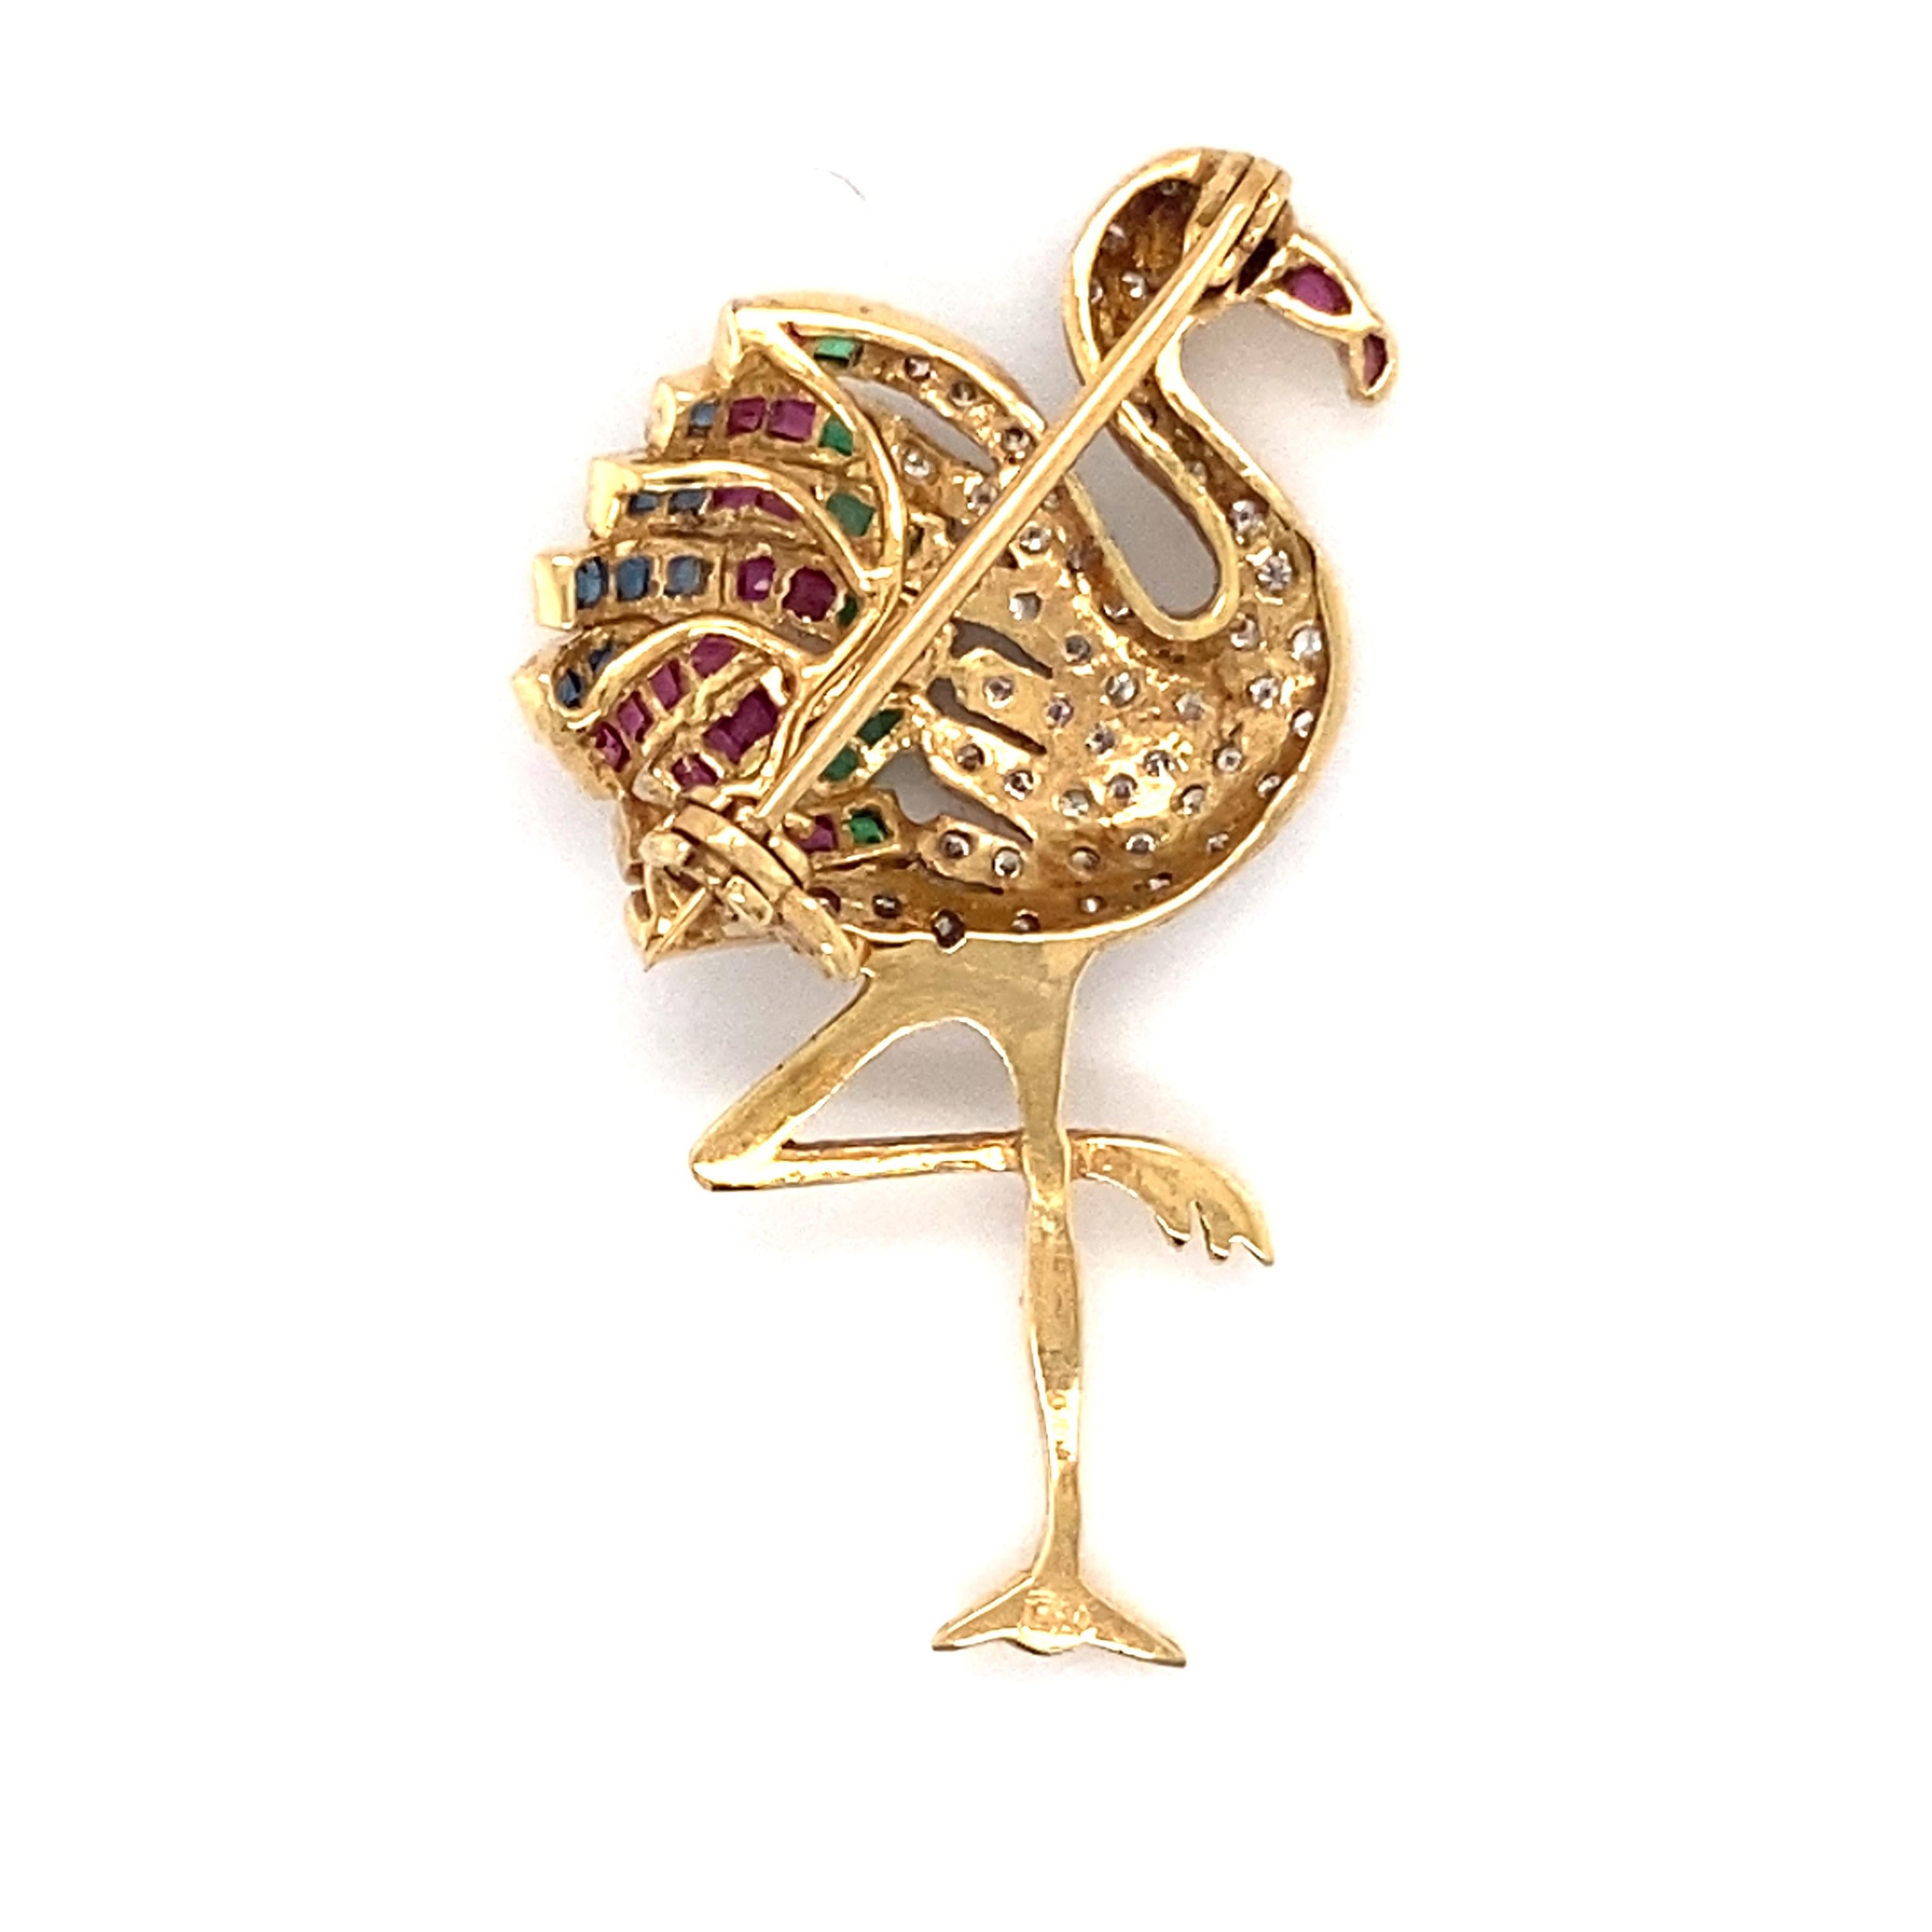 Contemporary 1970s Flamingo Pin featuring Ruby, Sapphire, Emerald in 18 Karat Yellow Gold For Sale